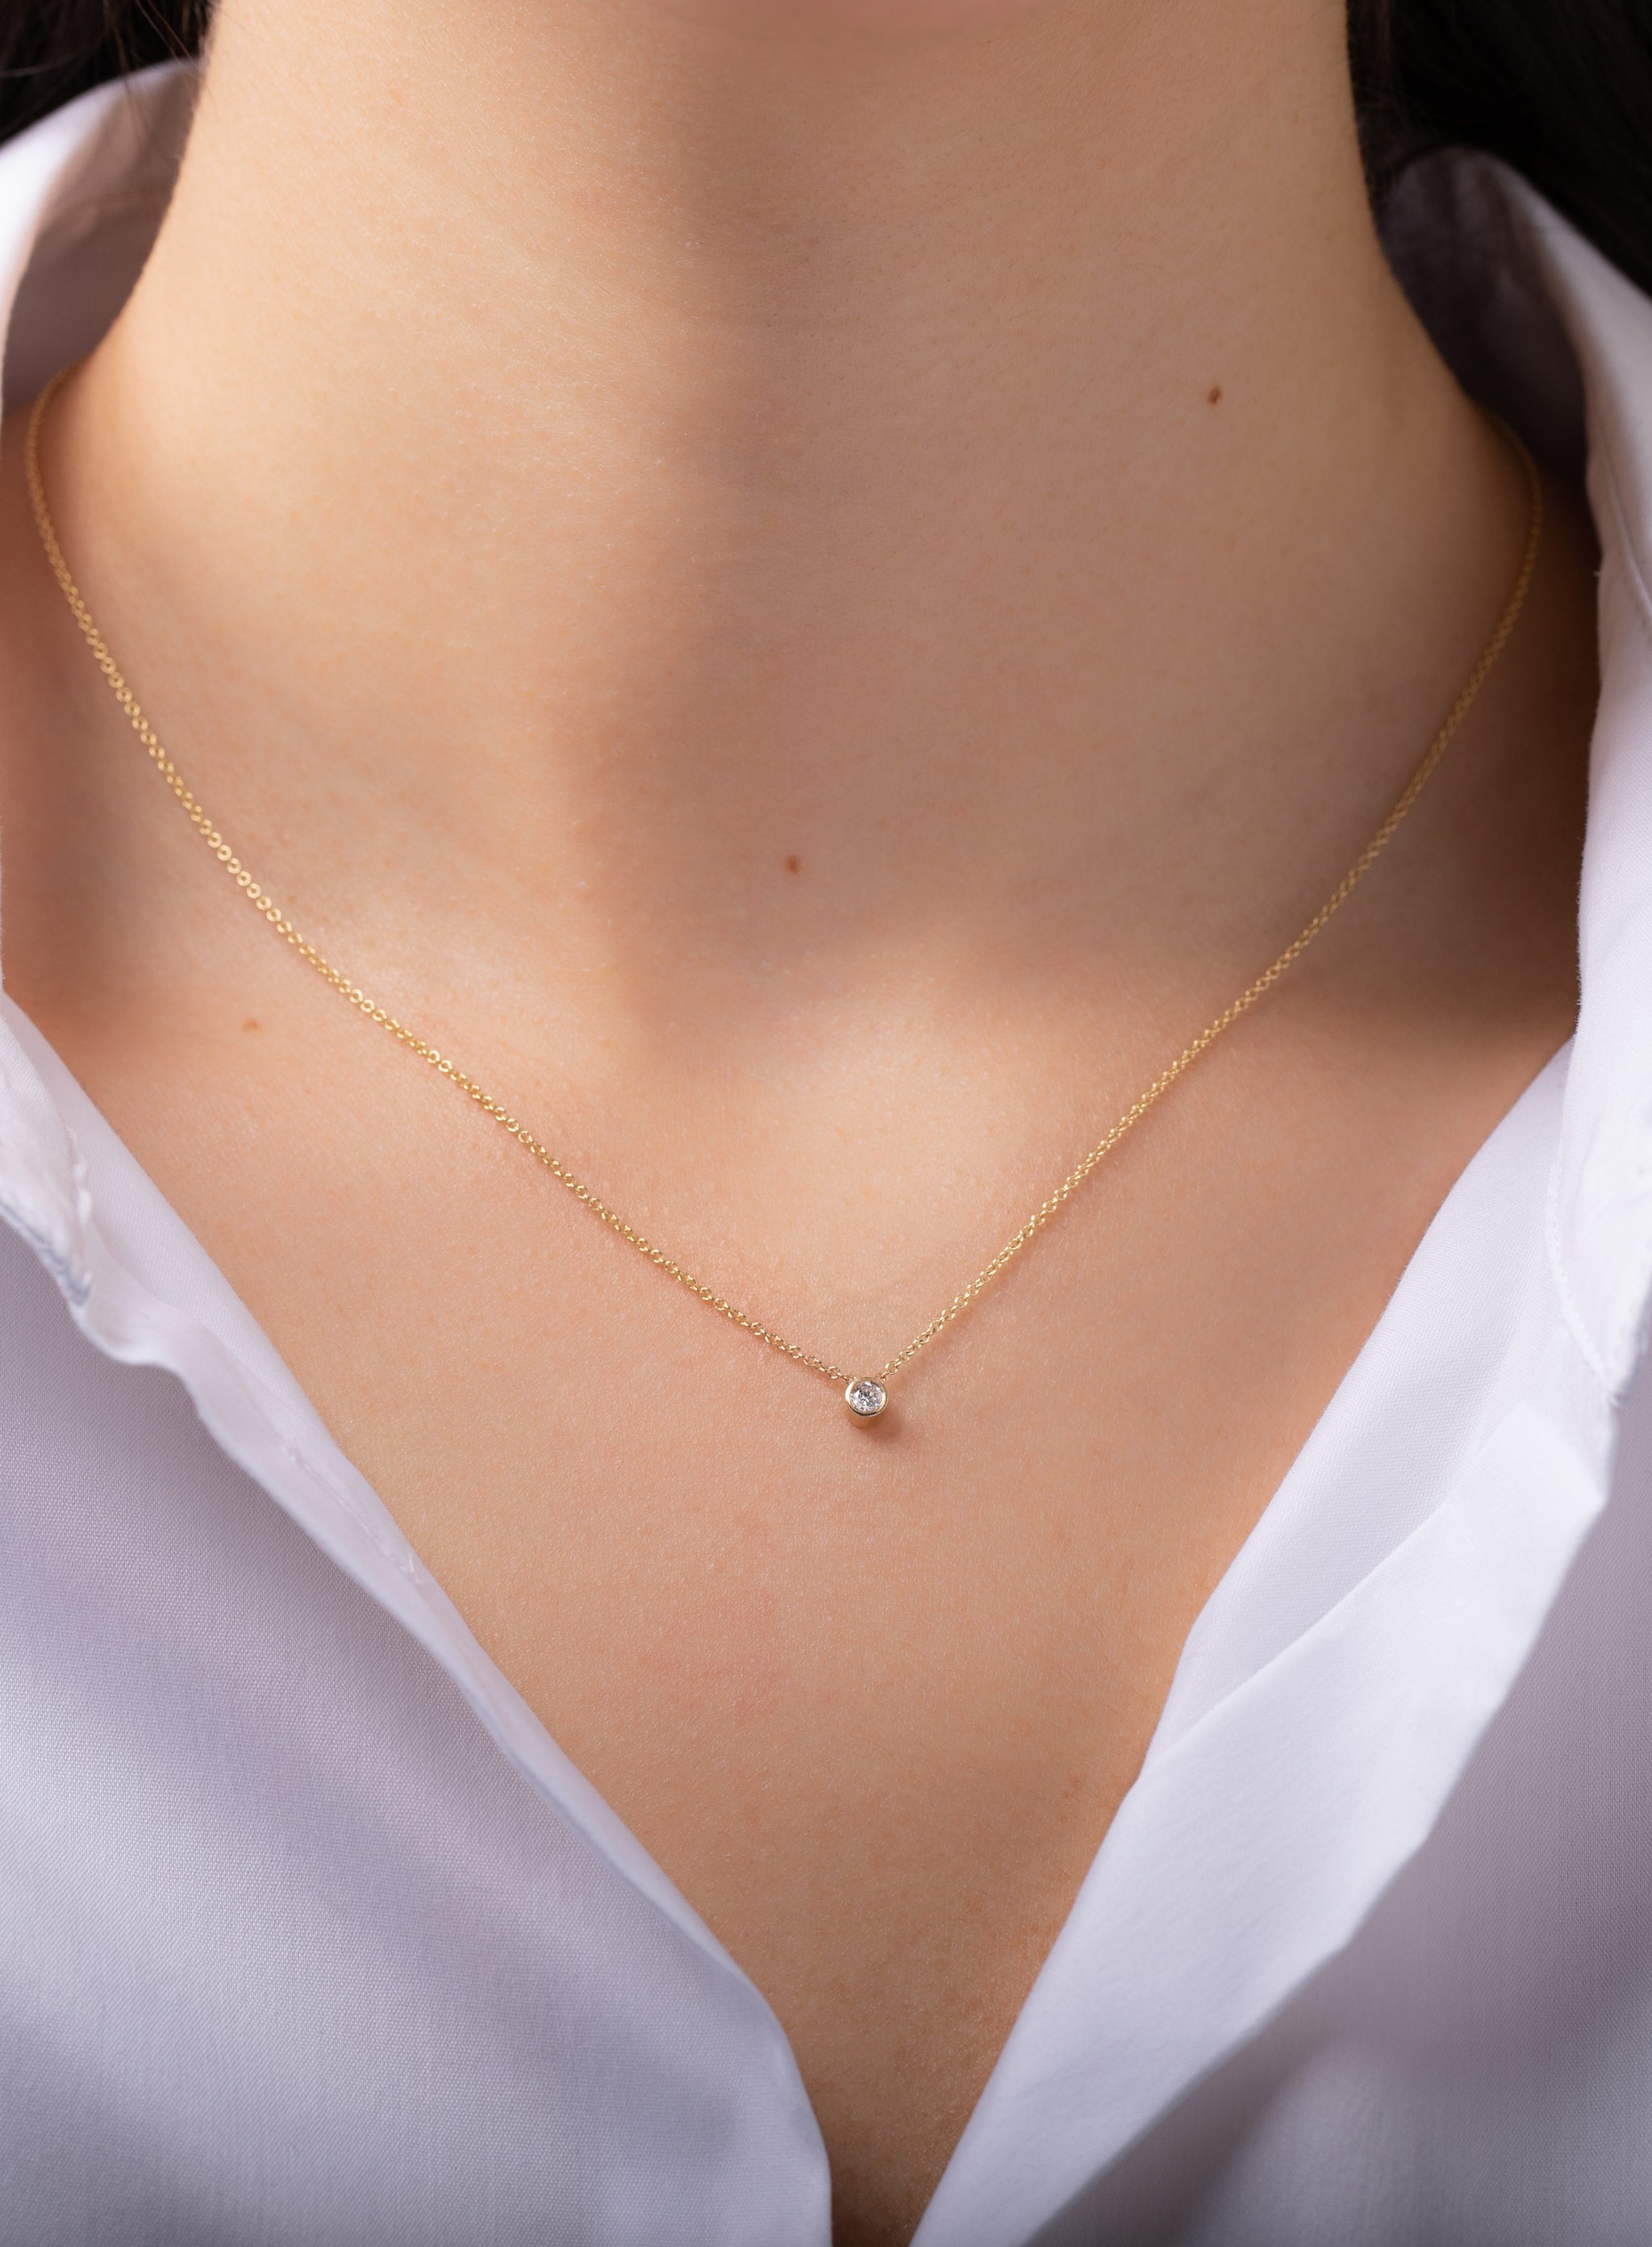 Buy White Diamond Necklace Pendant in 14k Real Gold | Chordia Jewels